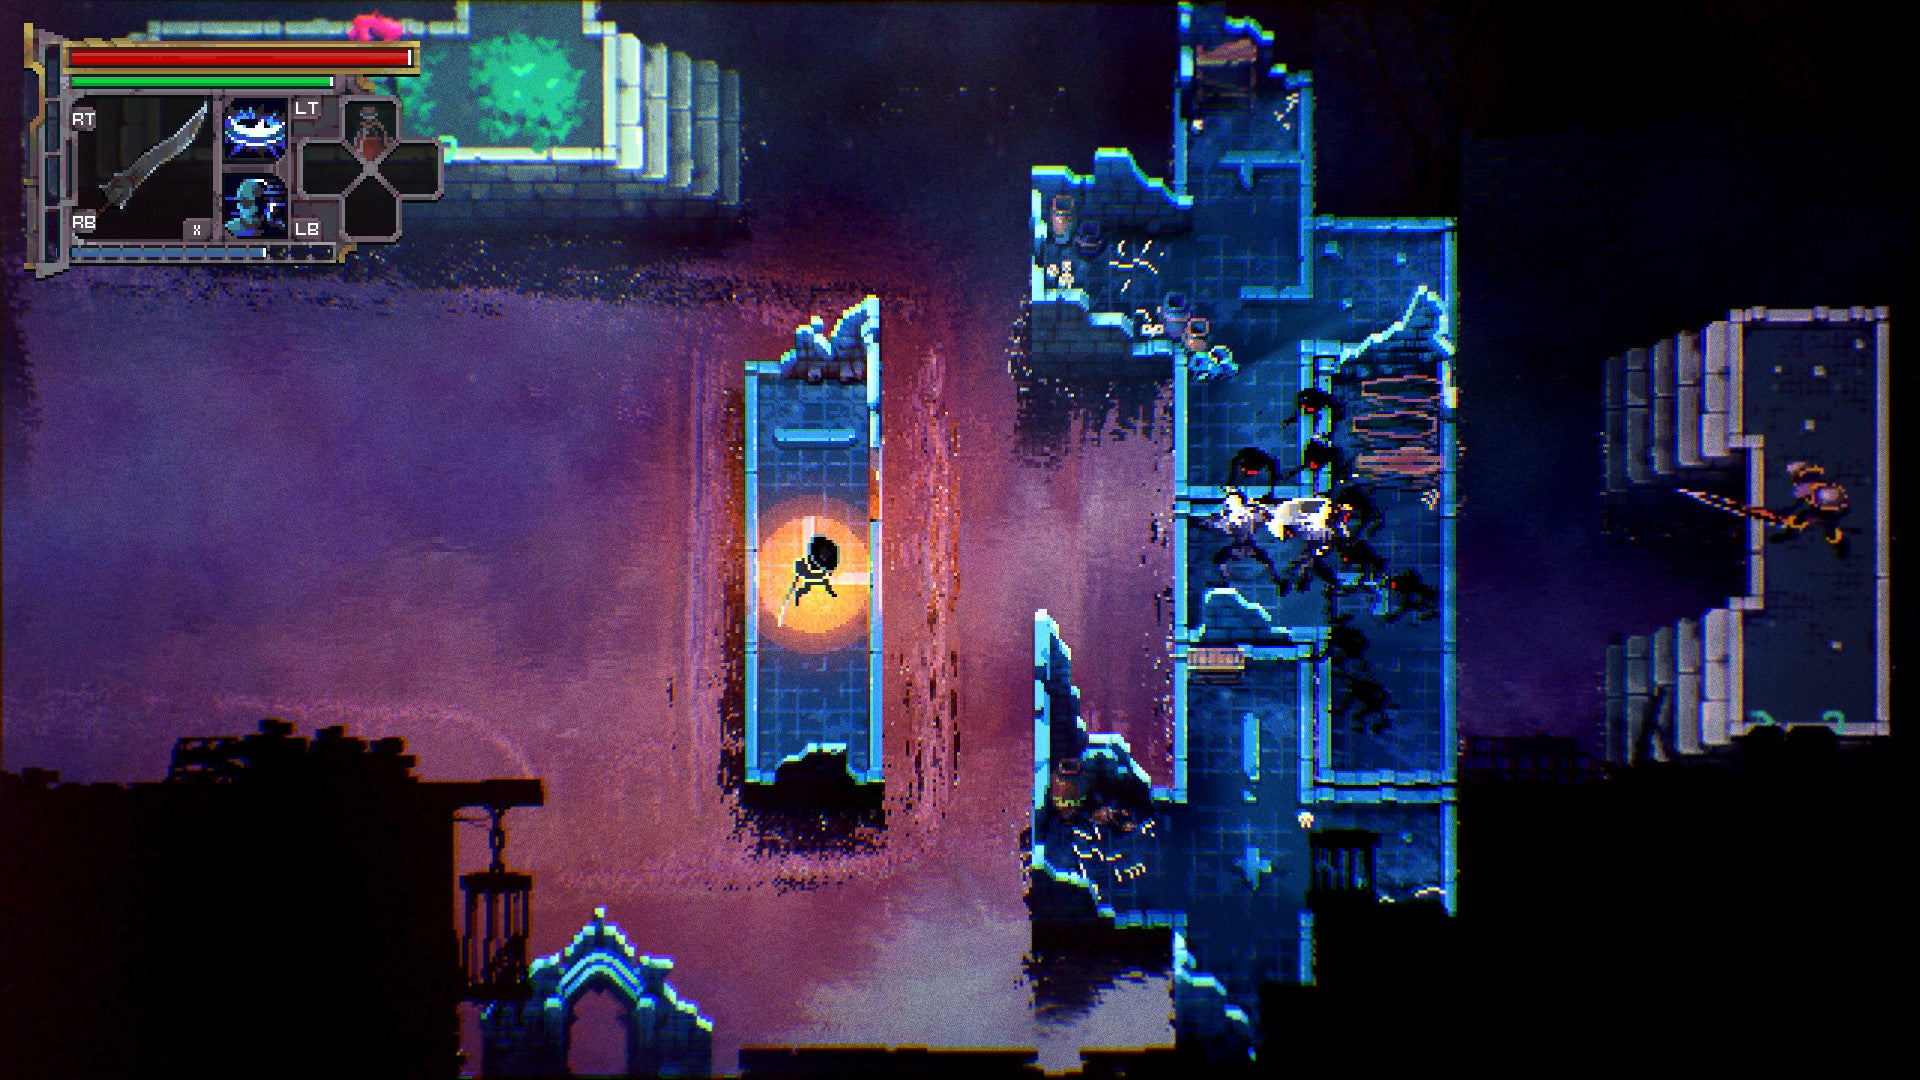 A screenshot of Loot River, a topdown 2D action game, depicting the protagonist on a rectangular platform surrounded by water. A nearby platform is covered in inky black demons.